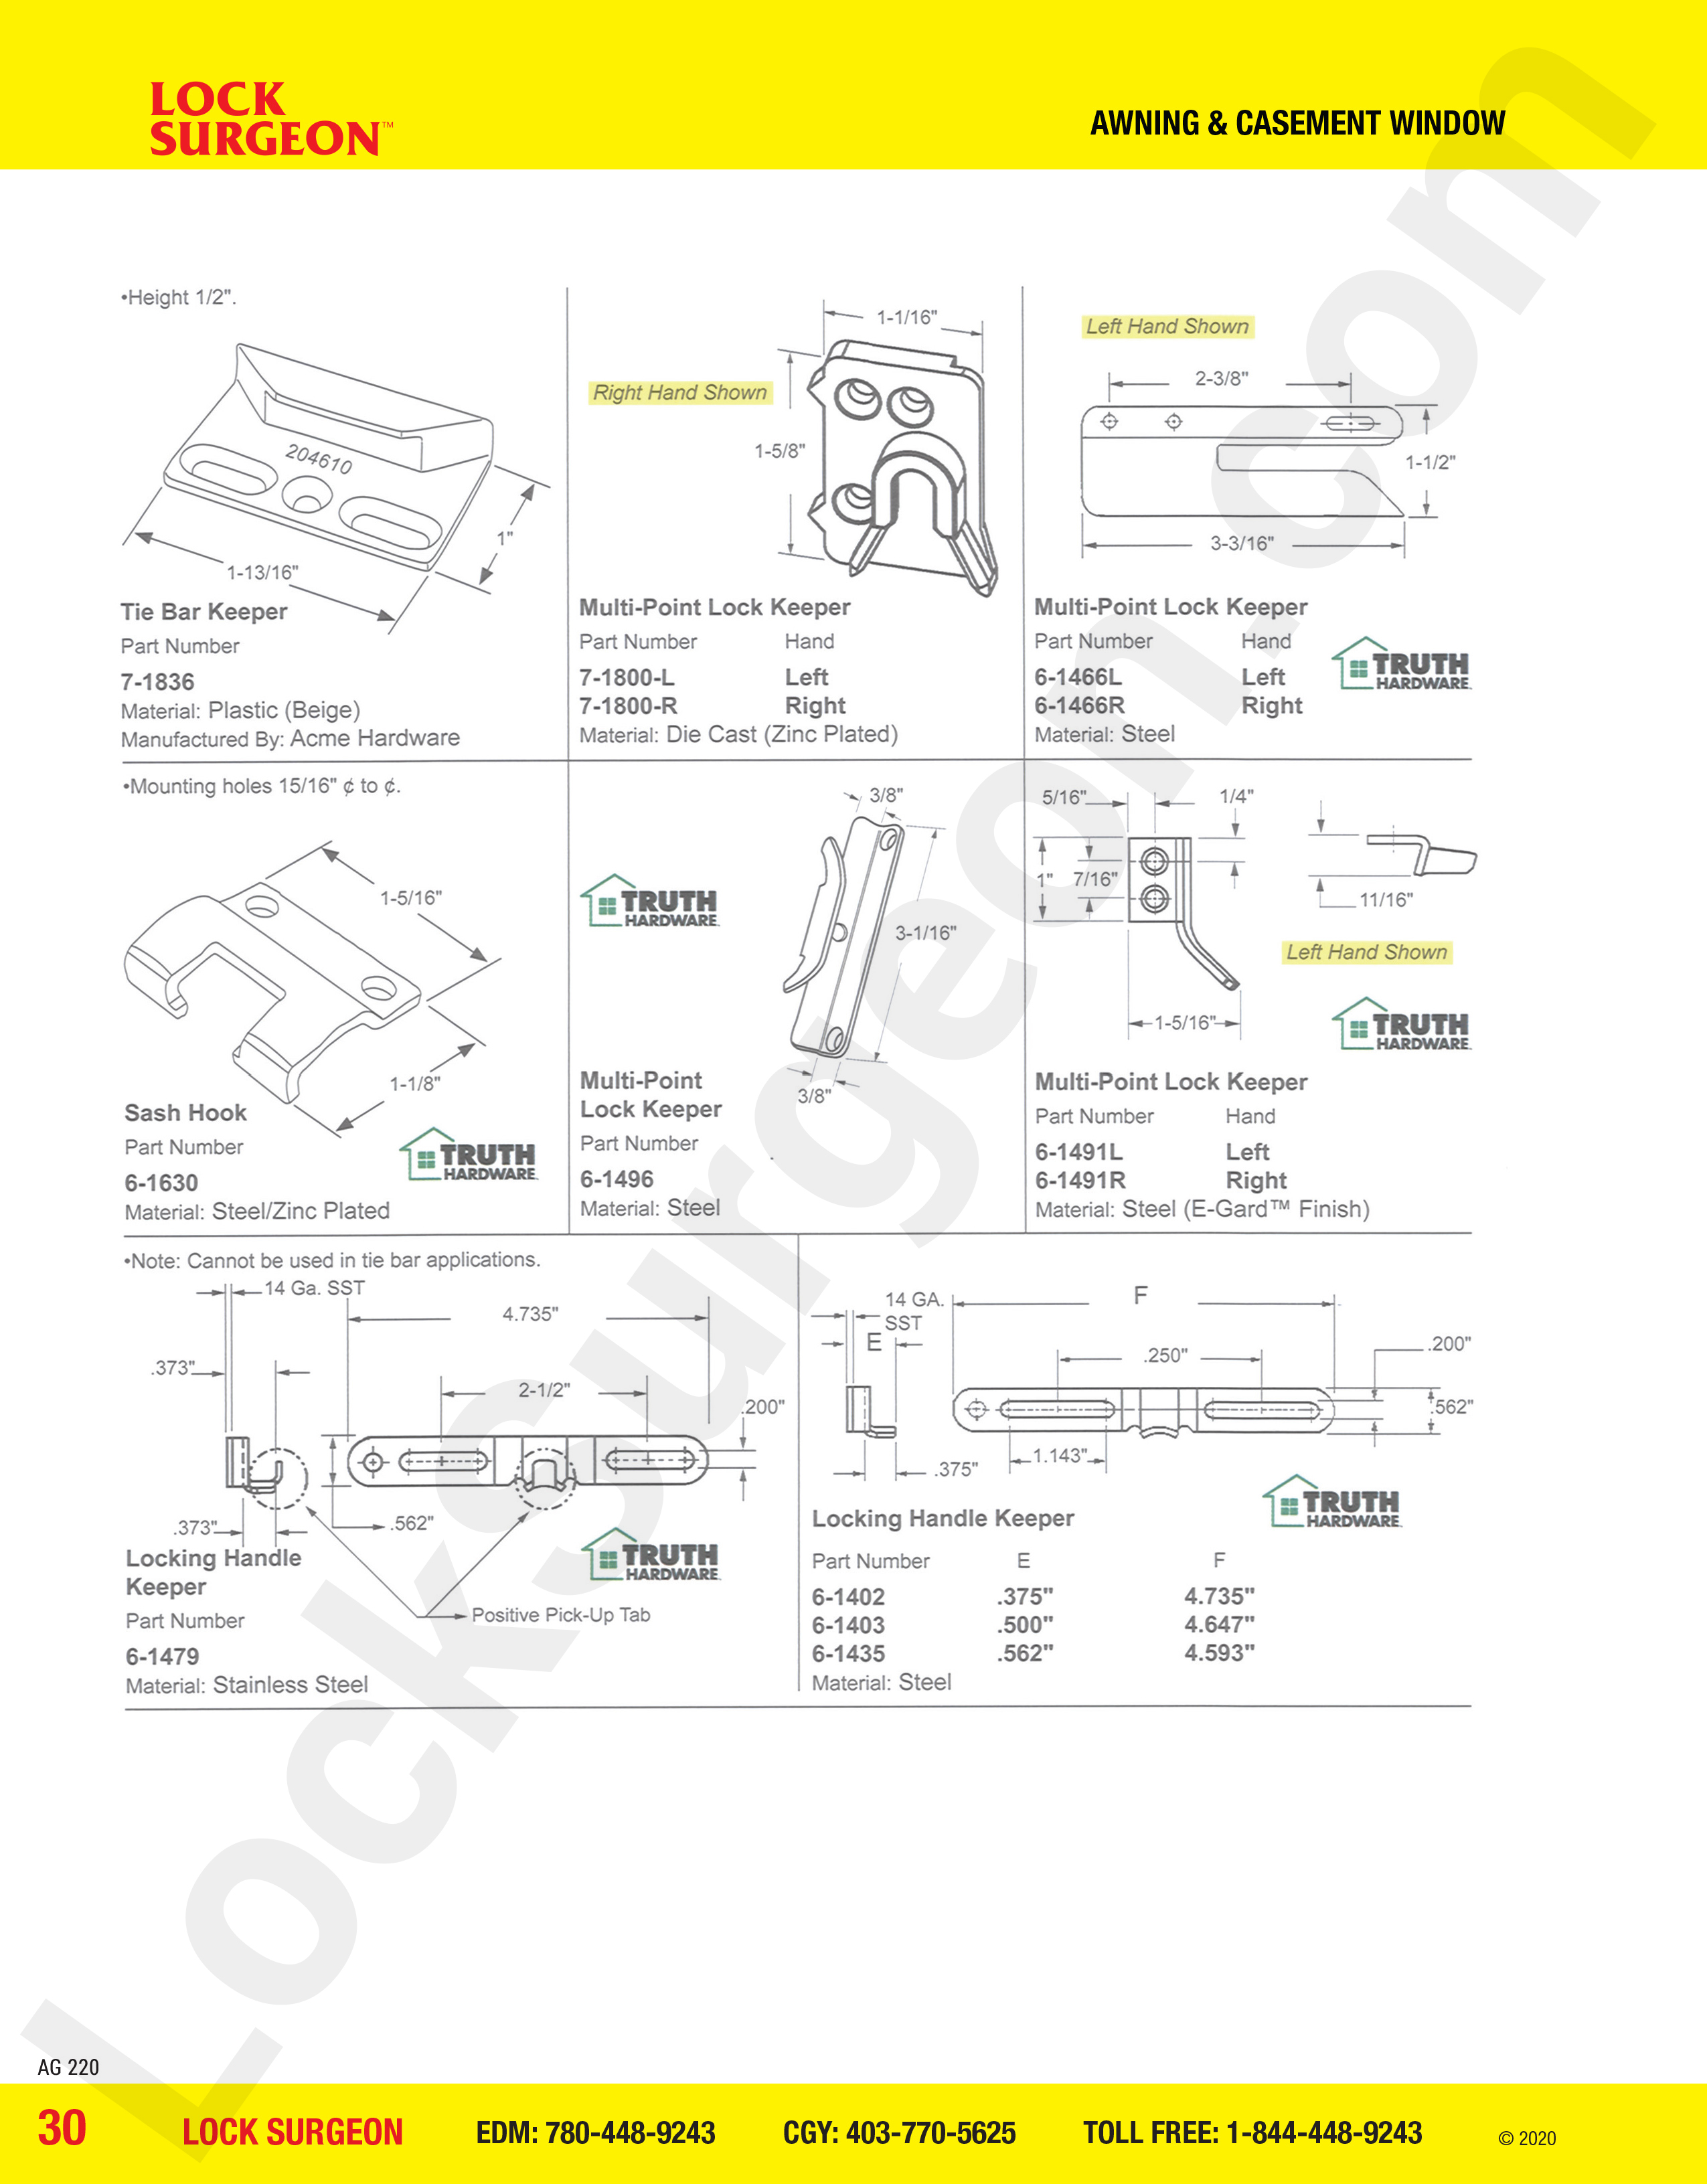 awning and casement window parts for keepers